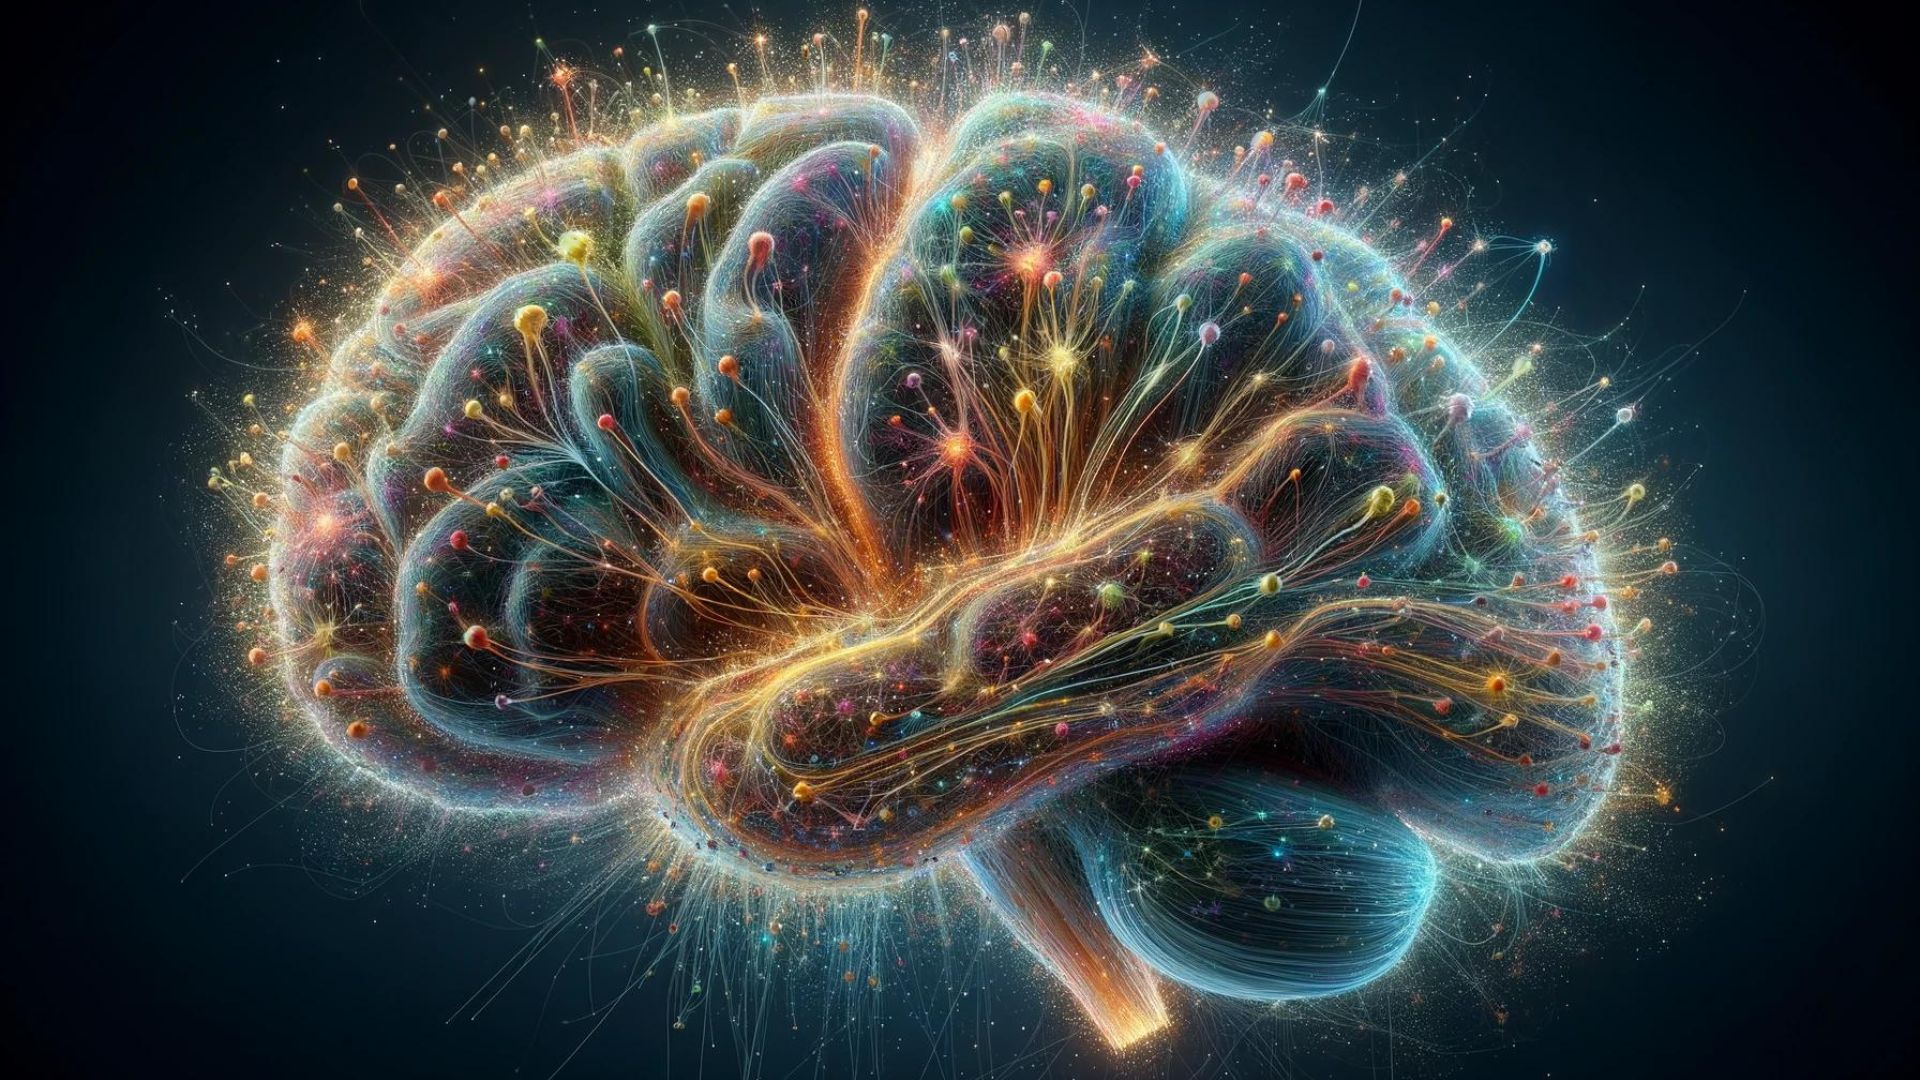 Did you know that your brain has around 96 billion neurons interconnected by trillions of synapses